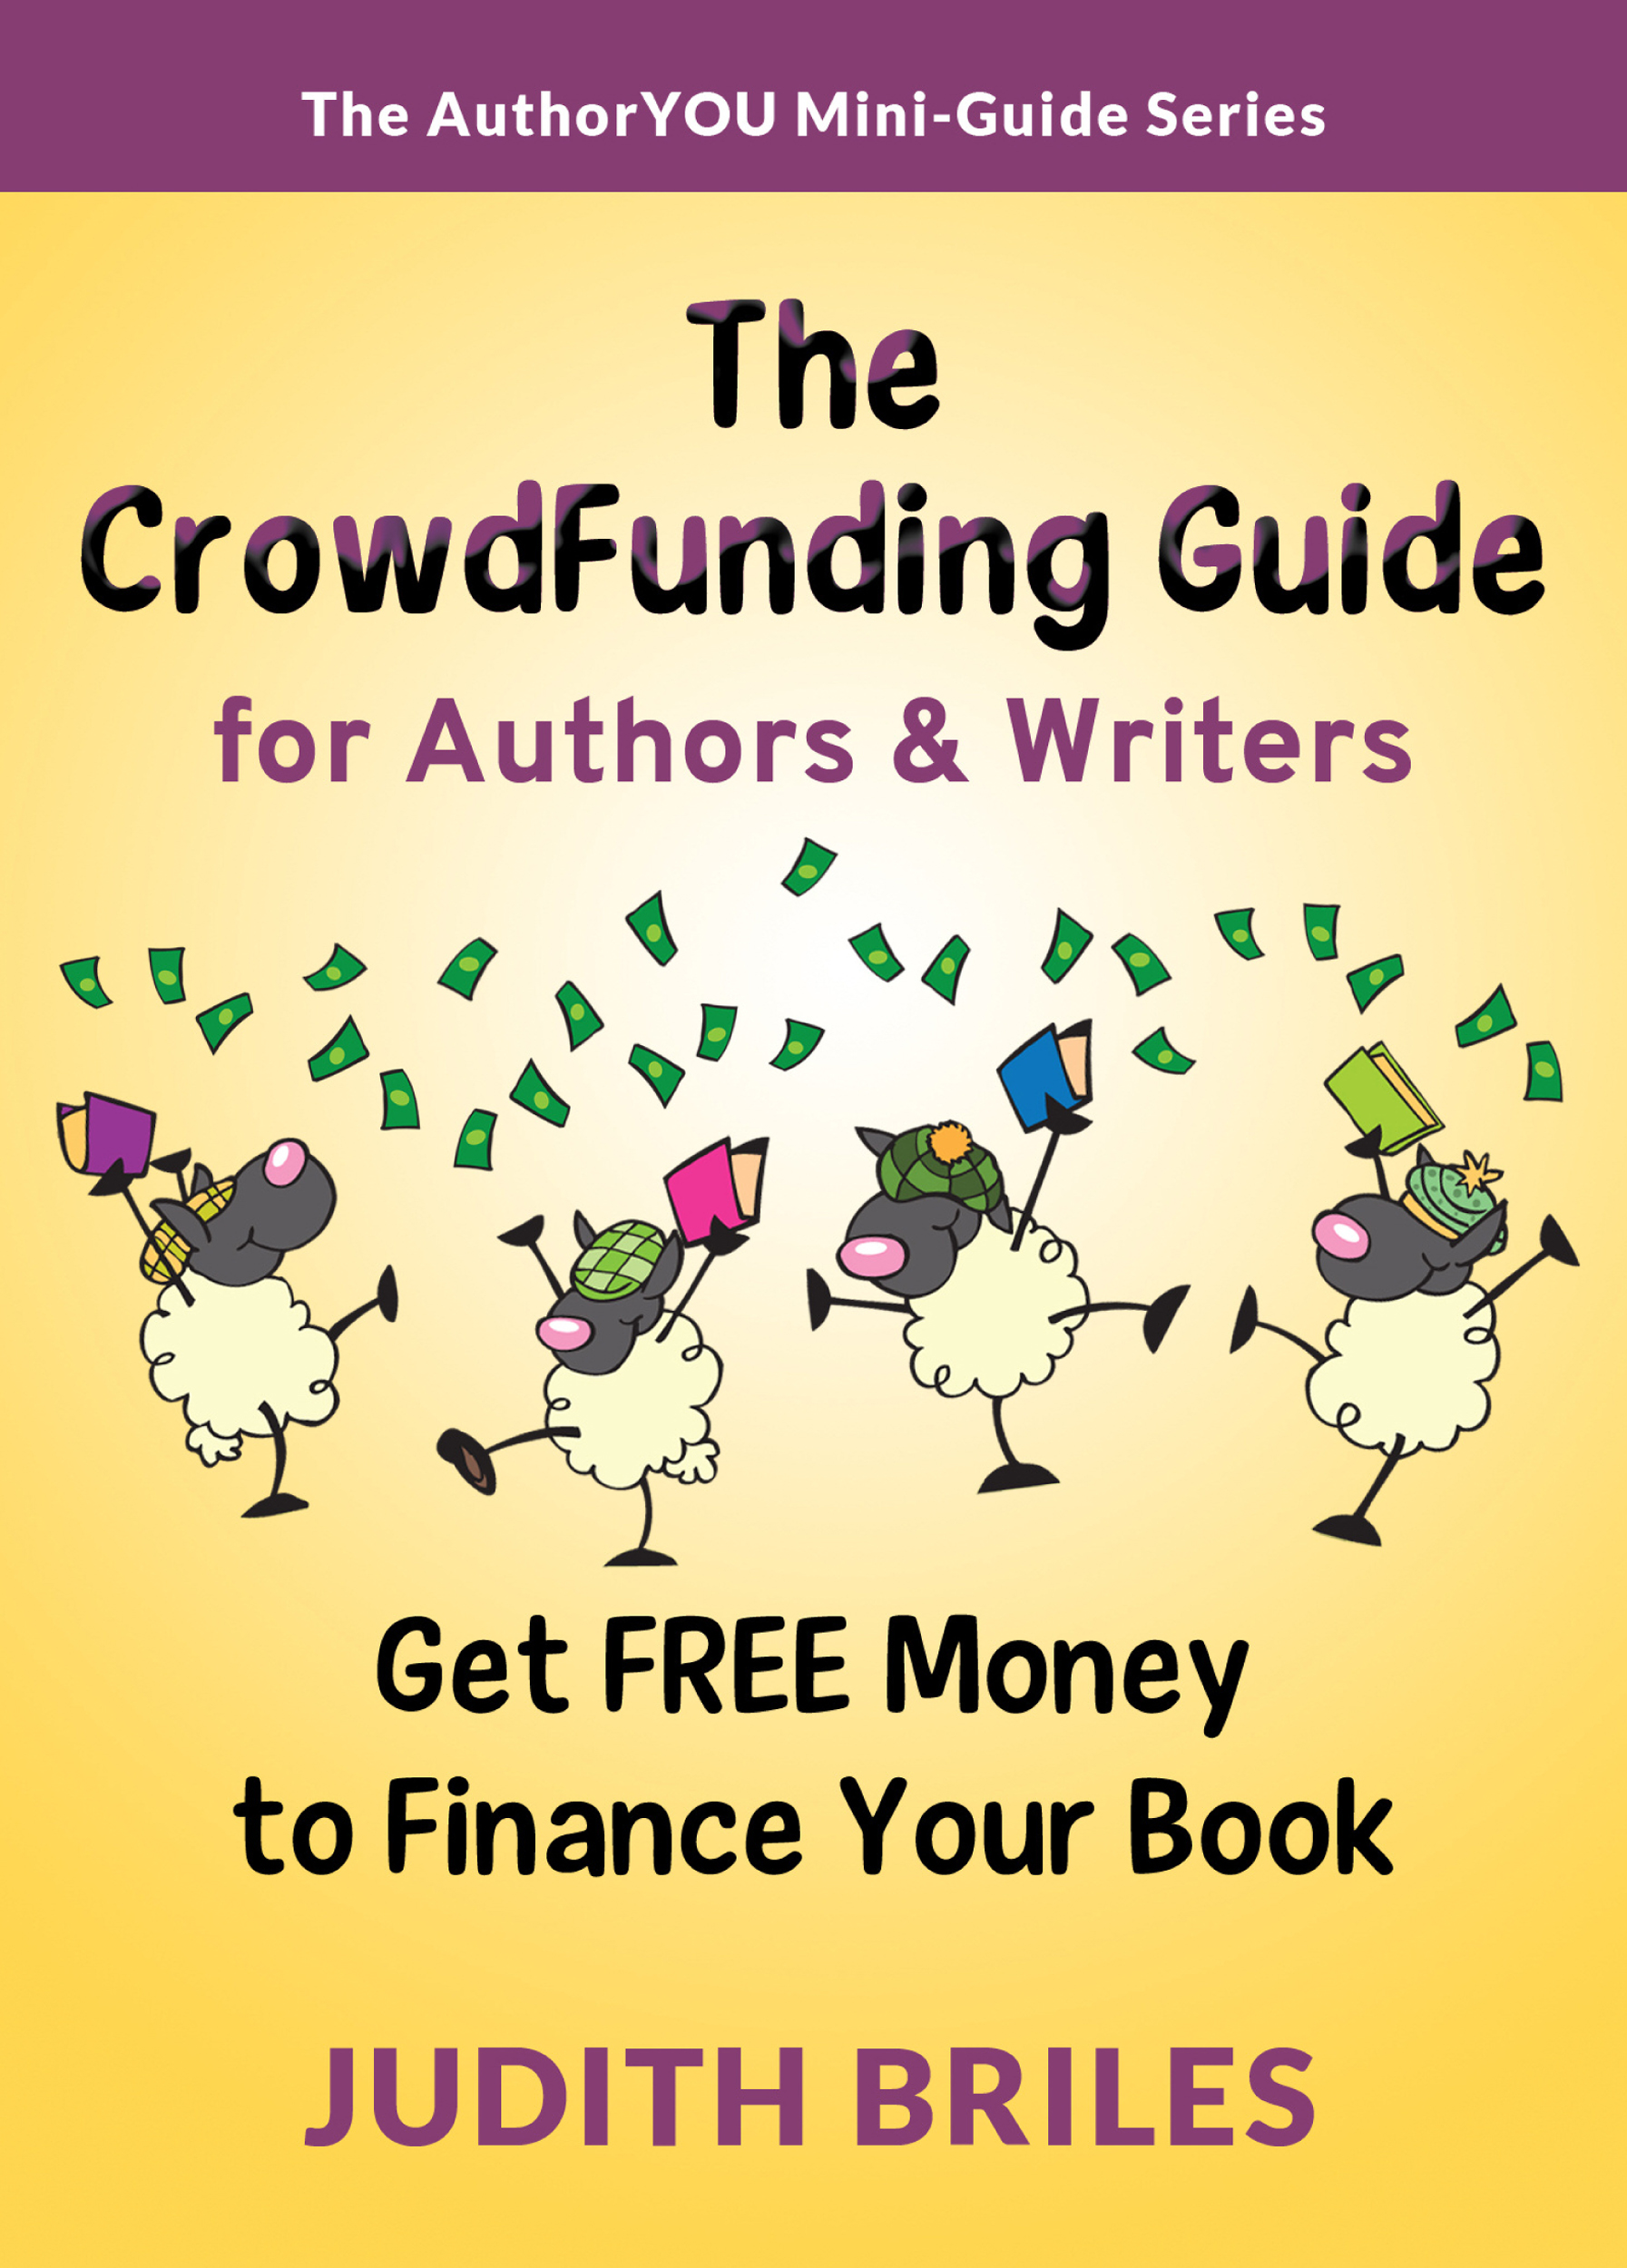 It’s Hot … CrowdFunding for Authors! Get New Book Today!